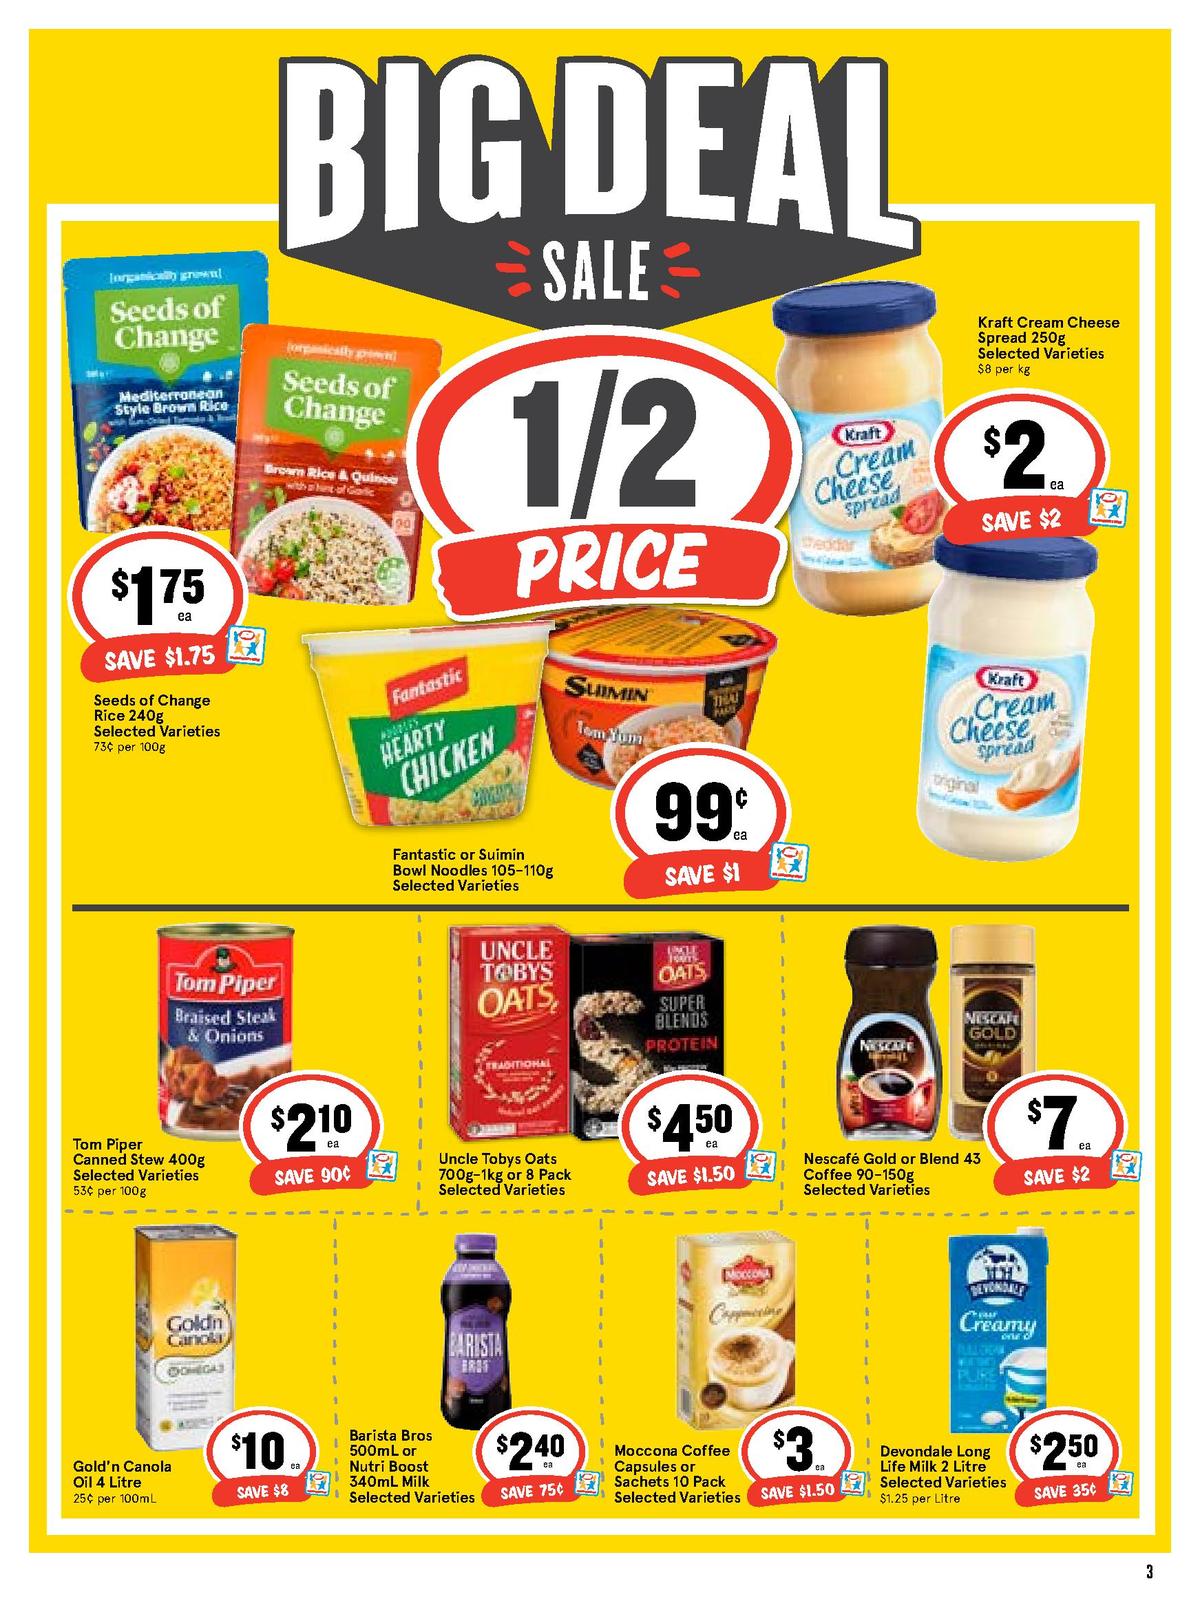 IGA Catalogues from 21 August